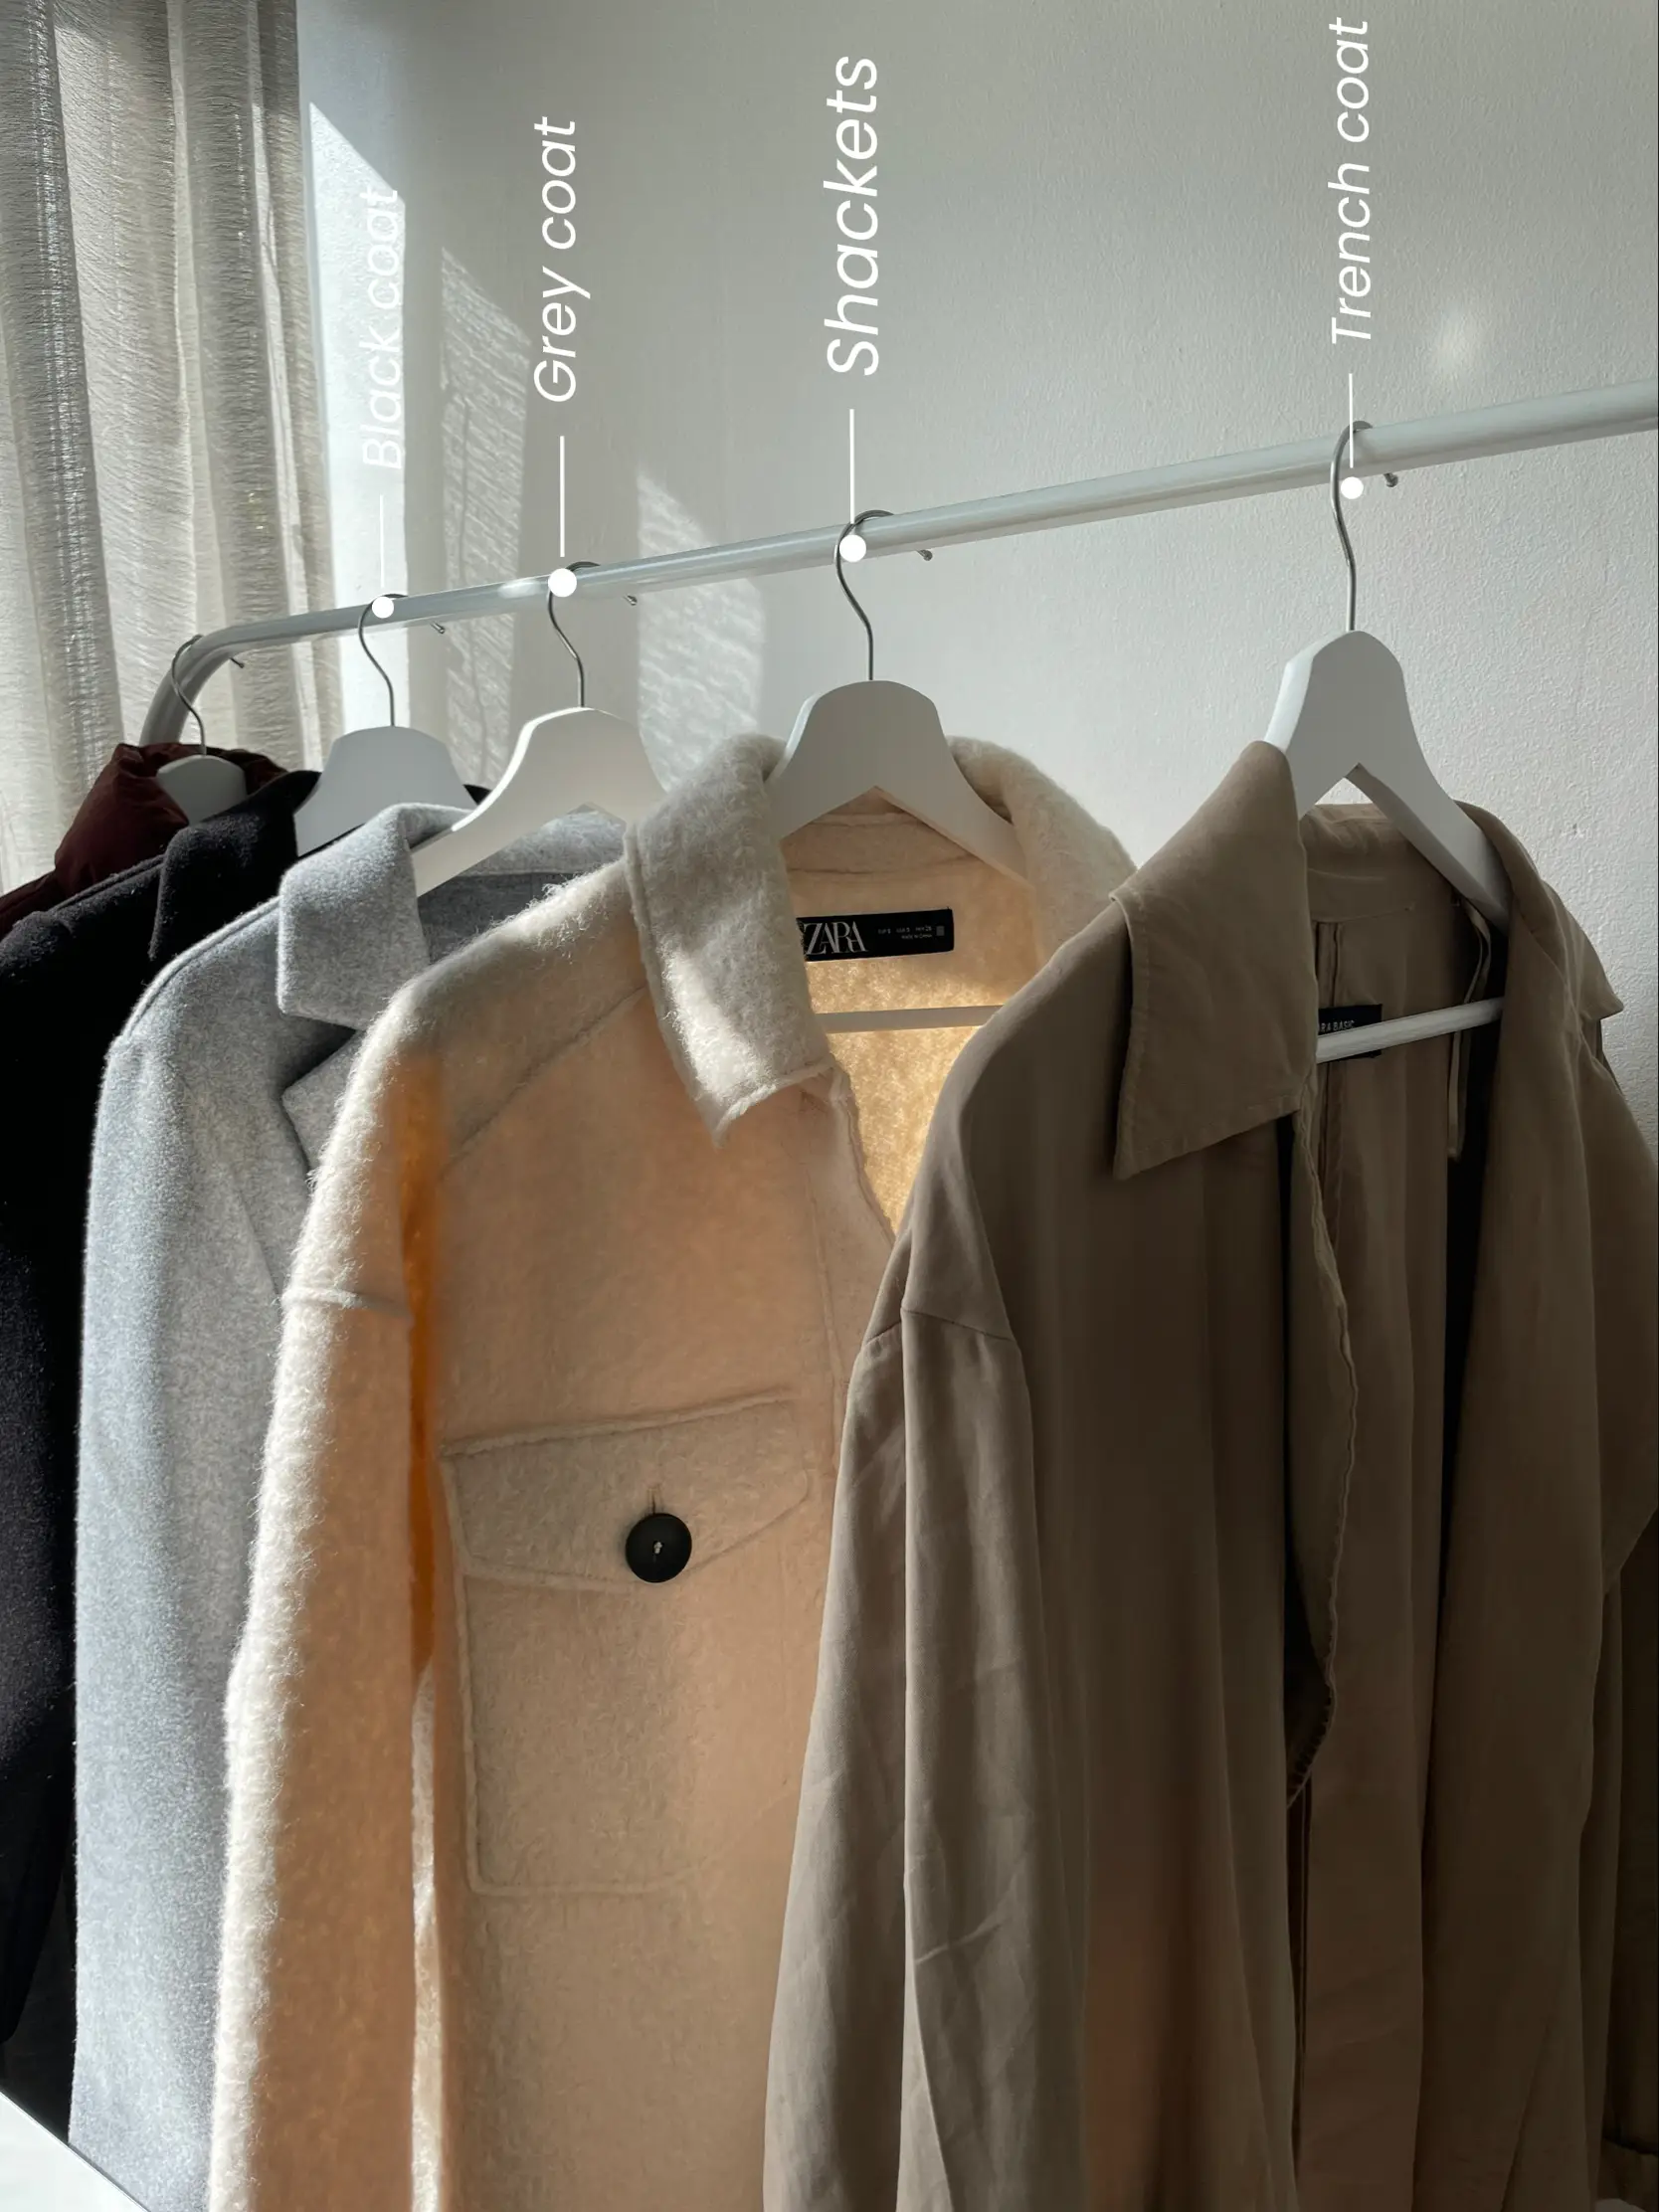 Outerwear Clothes hanger Sleeve Clothing, jacket hanging